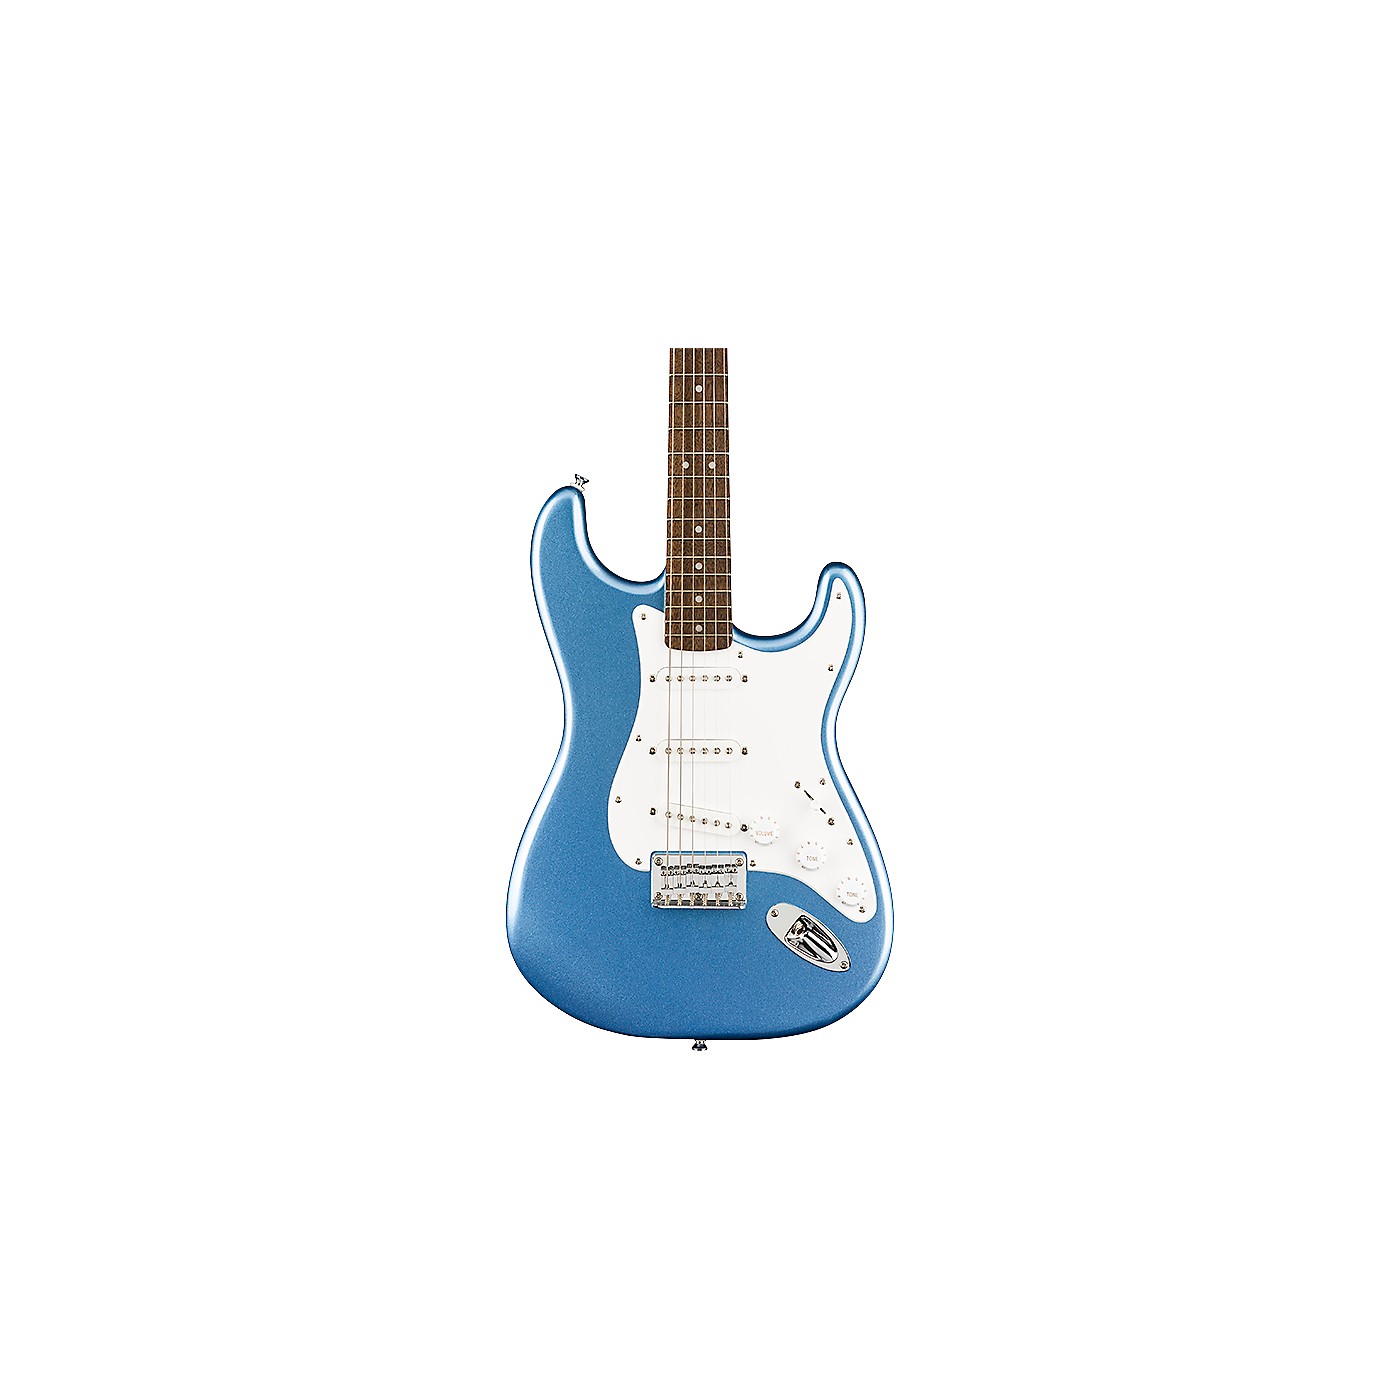 Squier Bullet Stratocaster Hardtail Limited-Edition Electric Guitar thumbnail